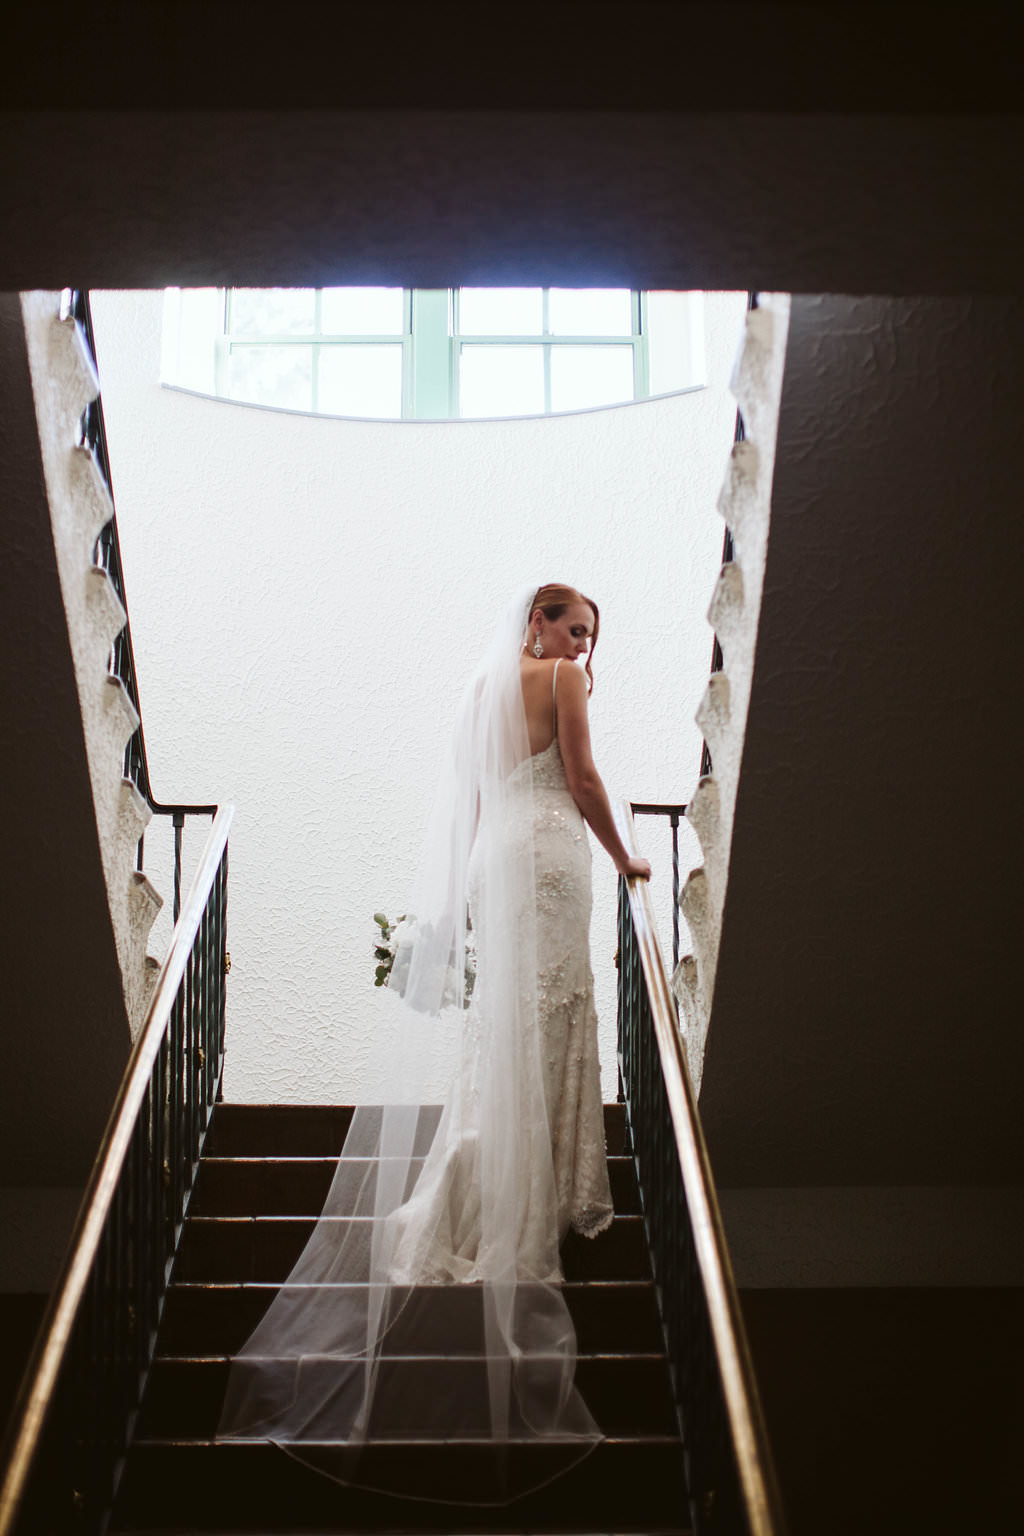 Brides in lace wedding dress and chapel veil on stairs